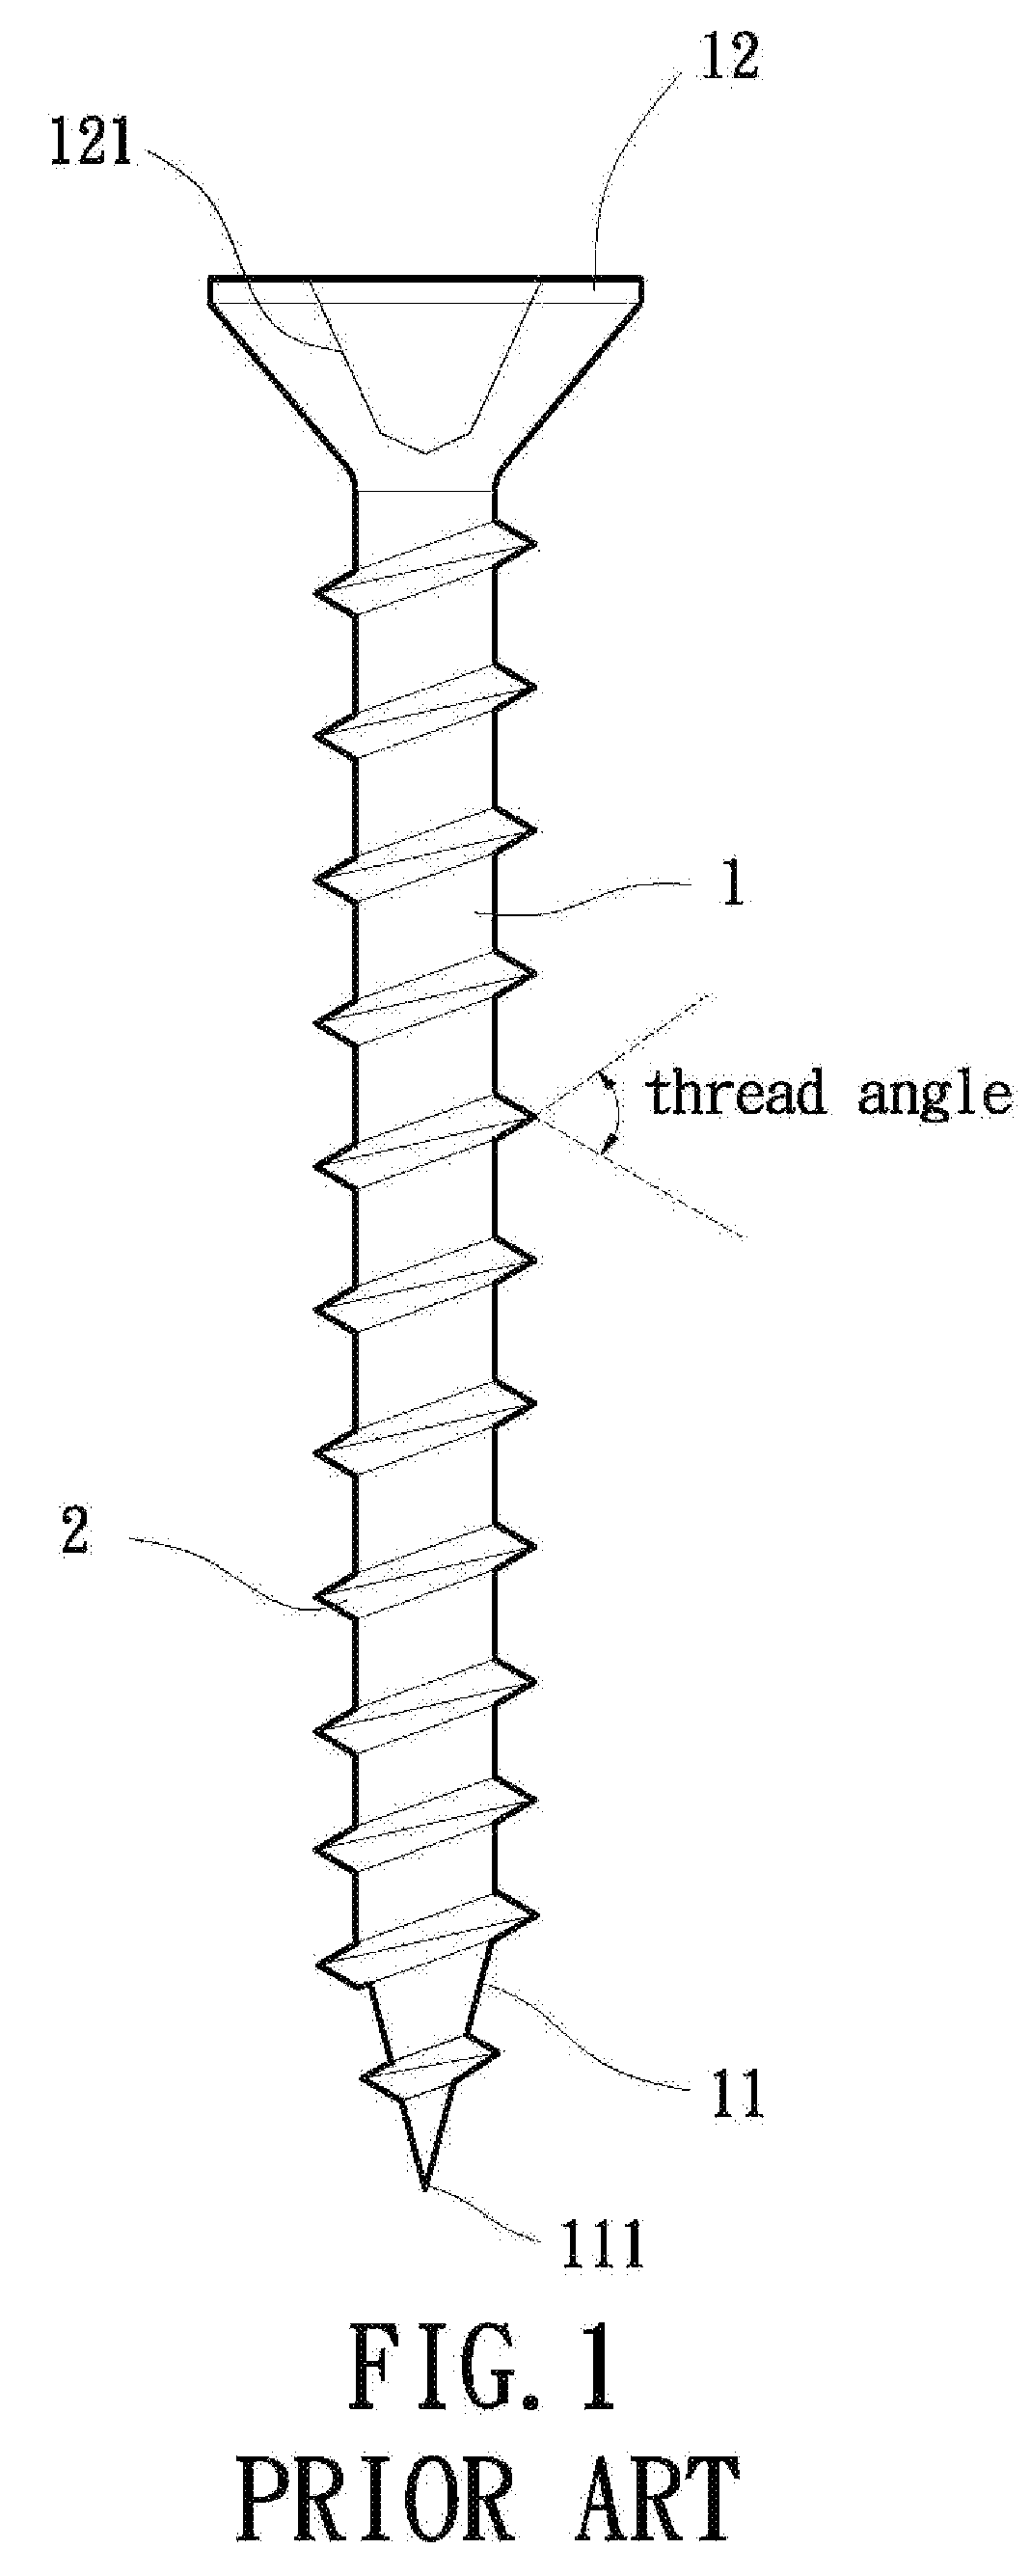 Screw member having two different thread angles formed on a sharp-edged thread